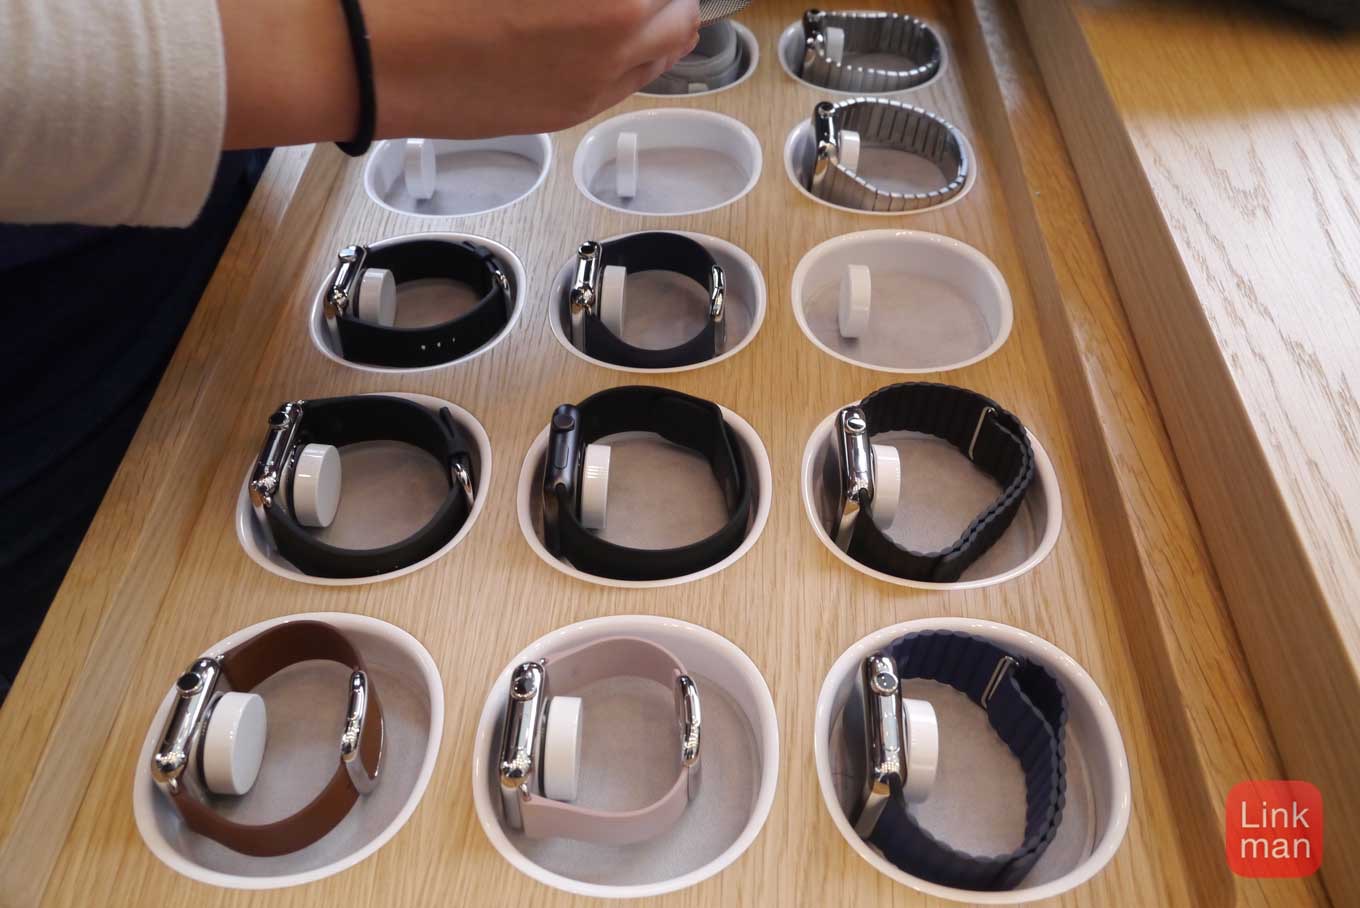 Applewatchpreview 02